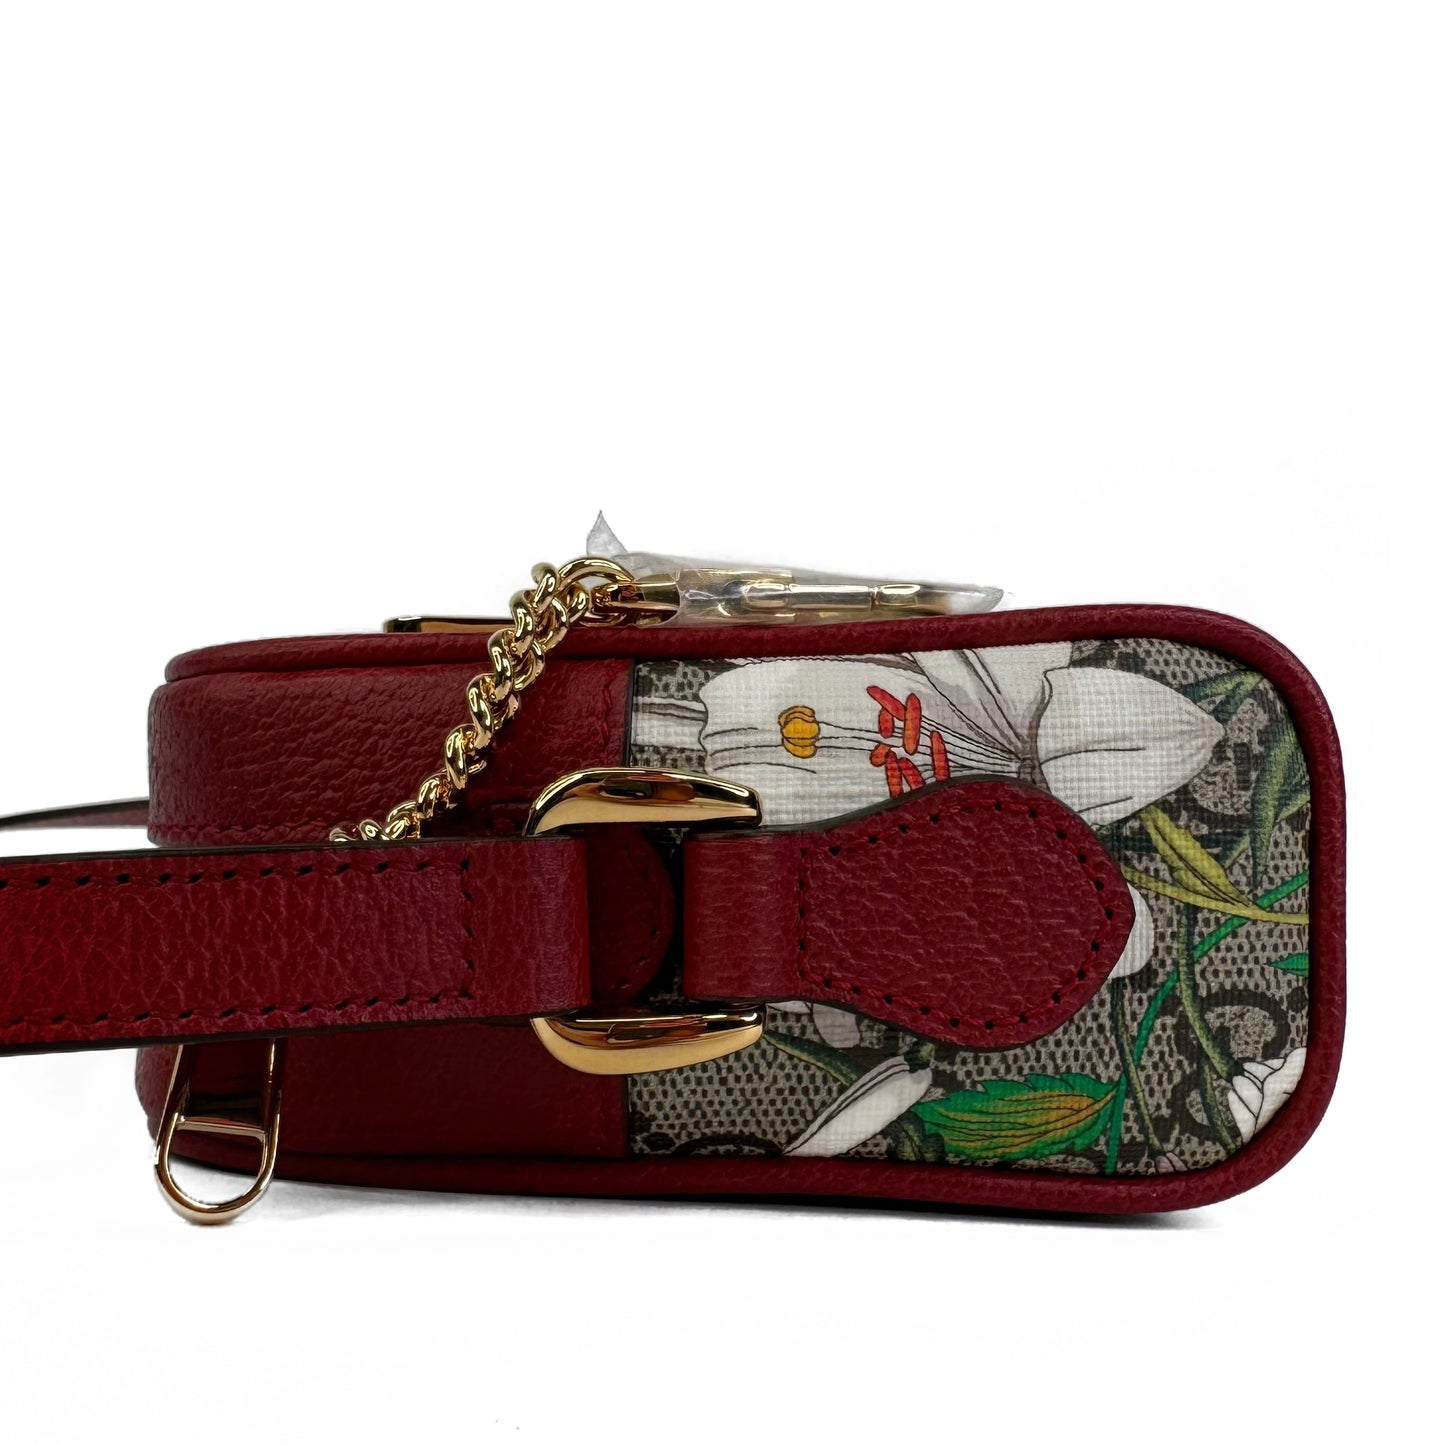 Gucci Ophidia Floral Crossbody Bag